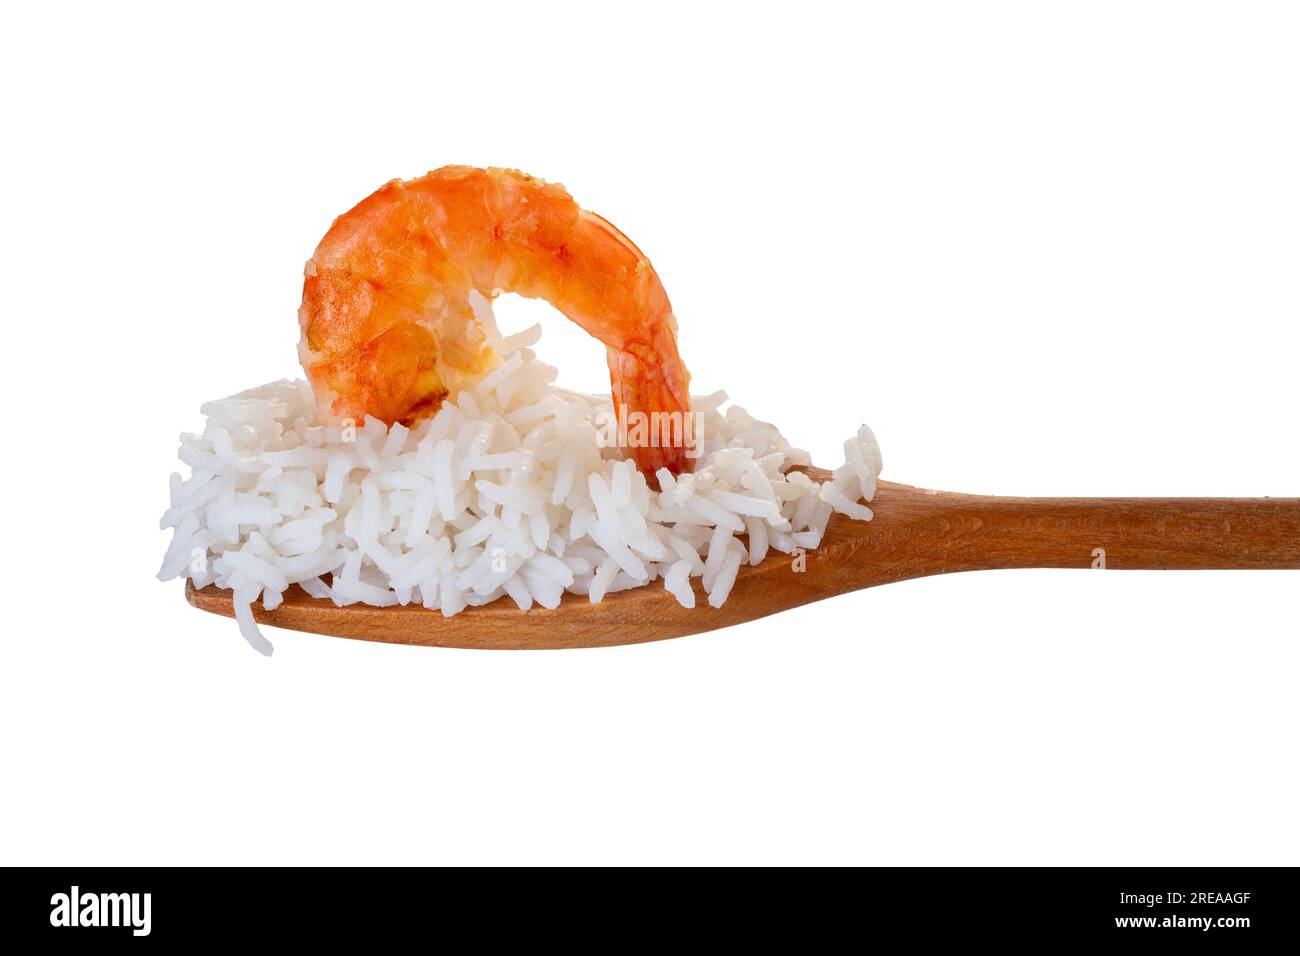 Fried shrimp on white boiled rice on wooden spoon isolated on white with clipping path included Stock Photo